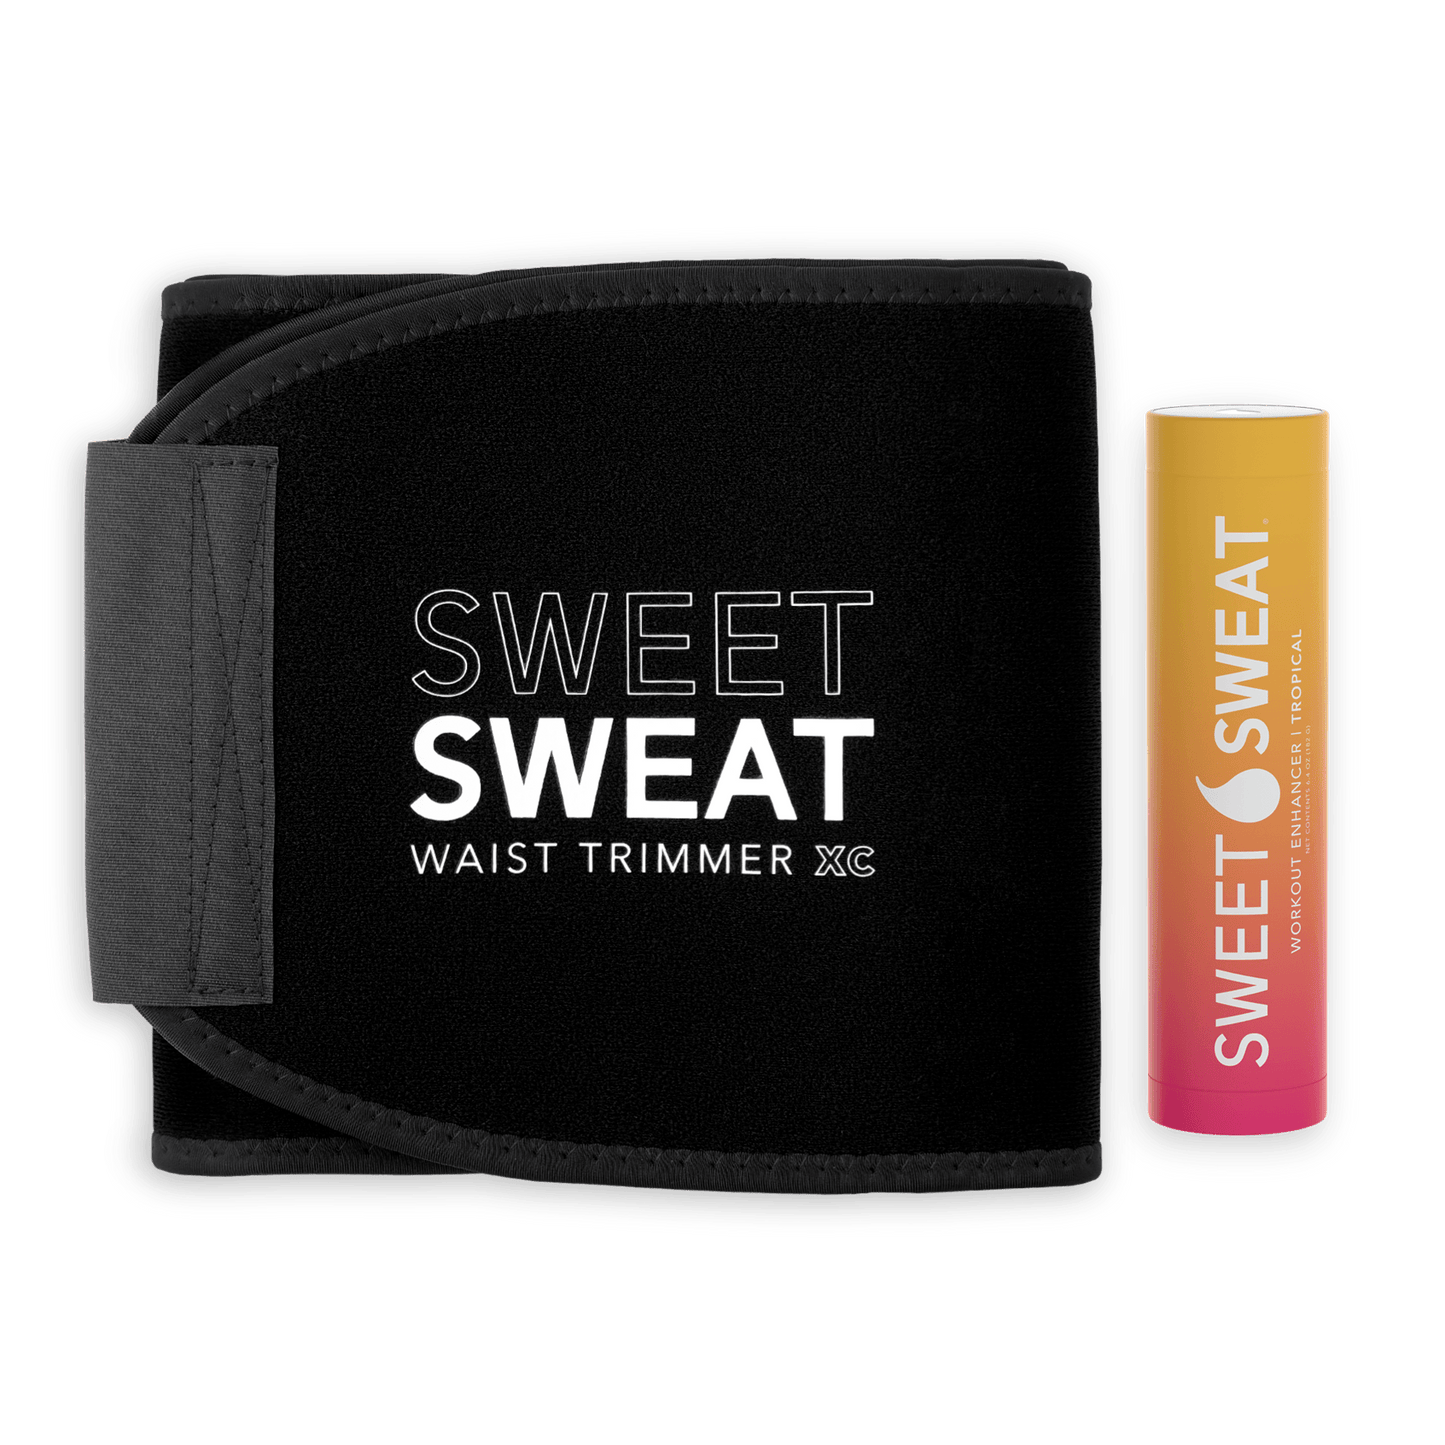 Sweet Sweat® Bundle with Xtra Coverage Waist Trimmer & Sweet Sweat® Stick